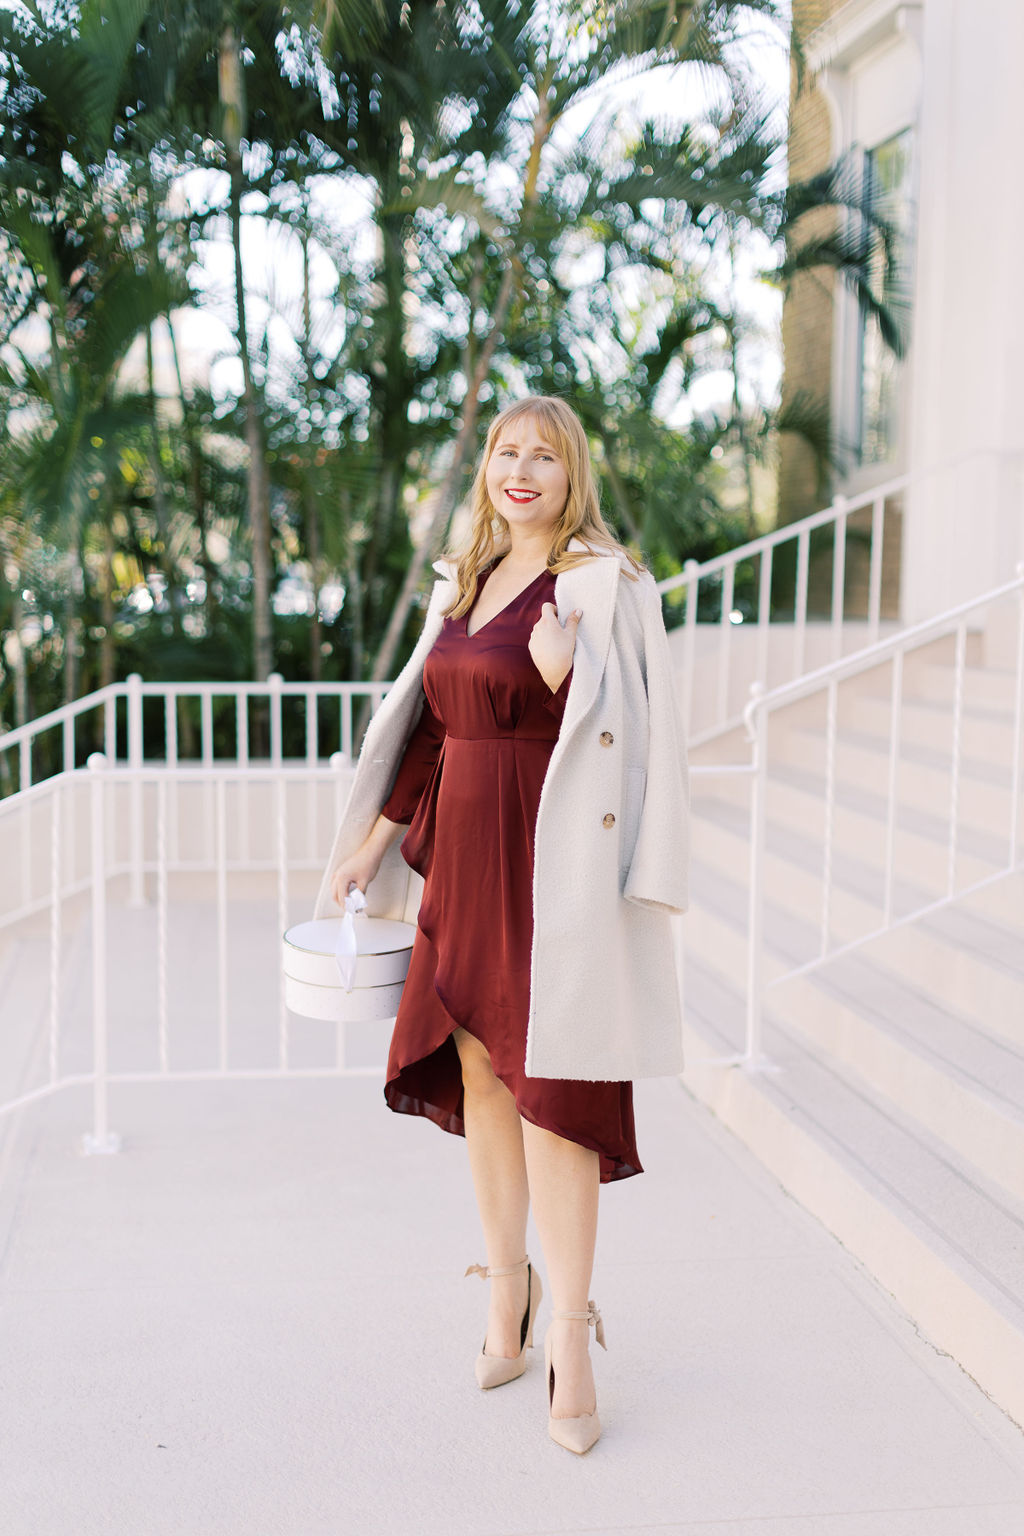 Budget friendly corporate midi dresses for the office#outfitinspo #out